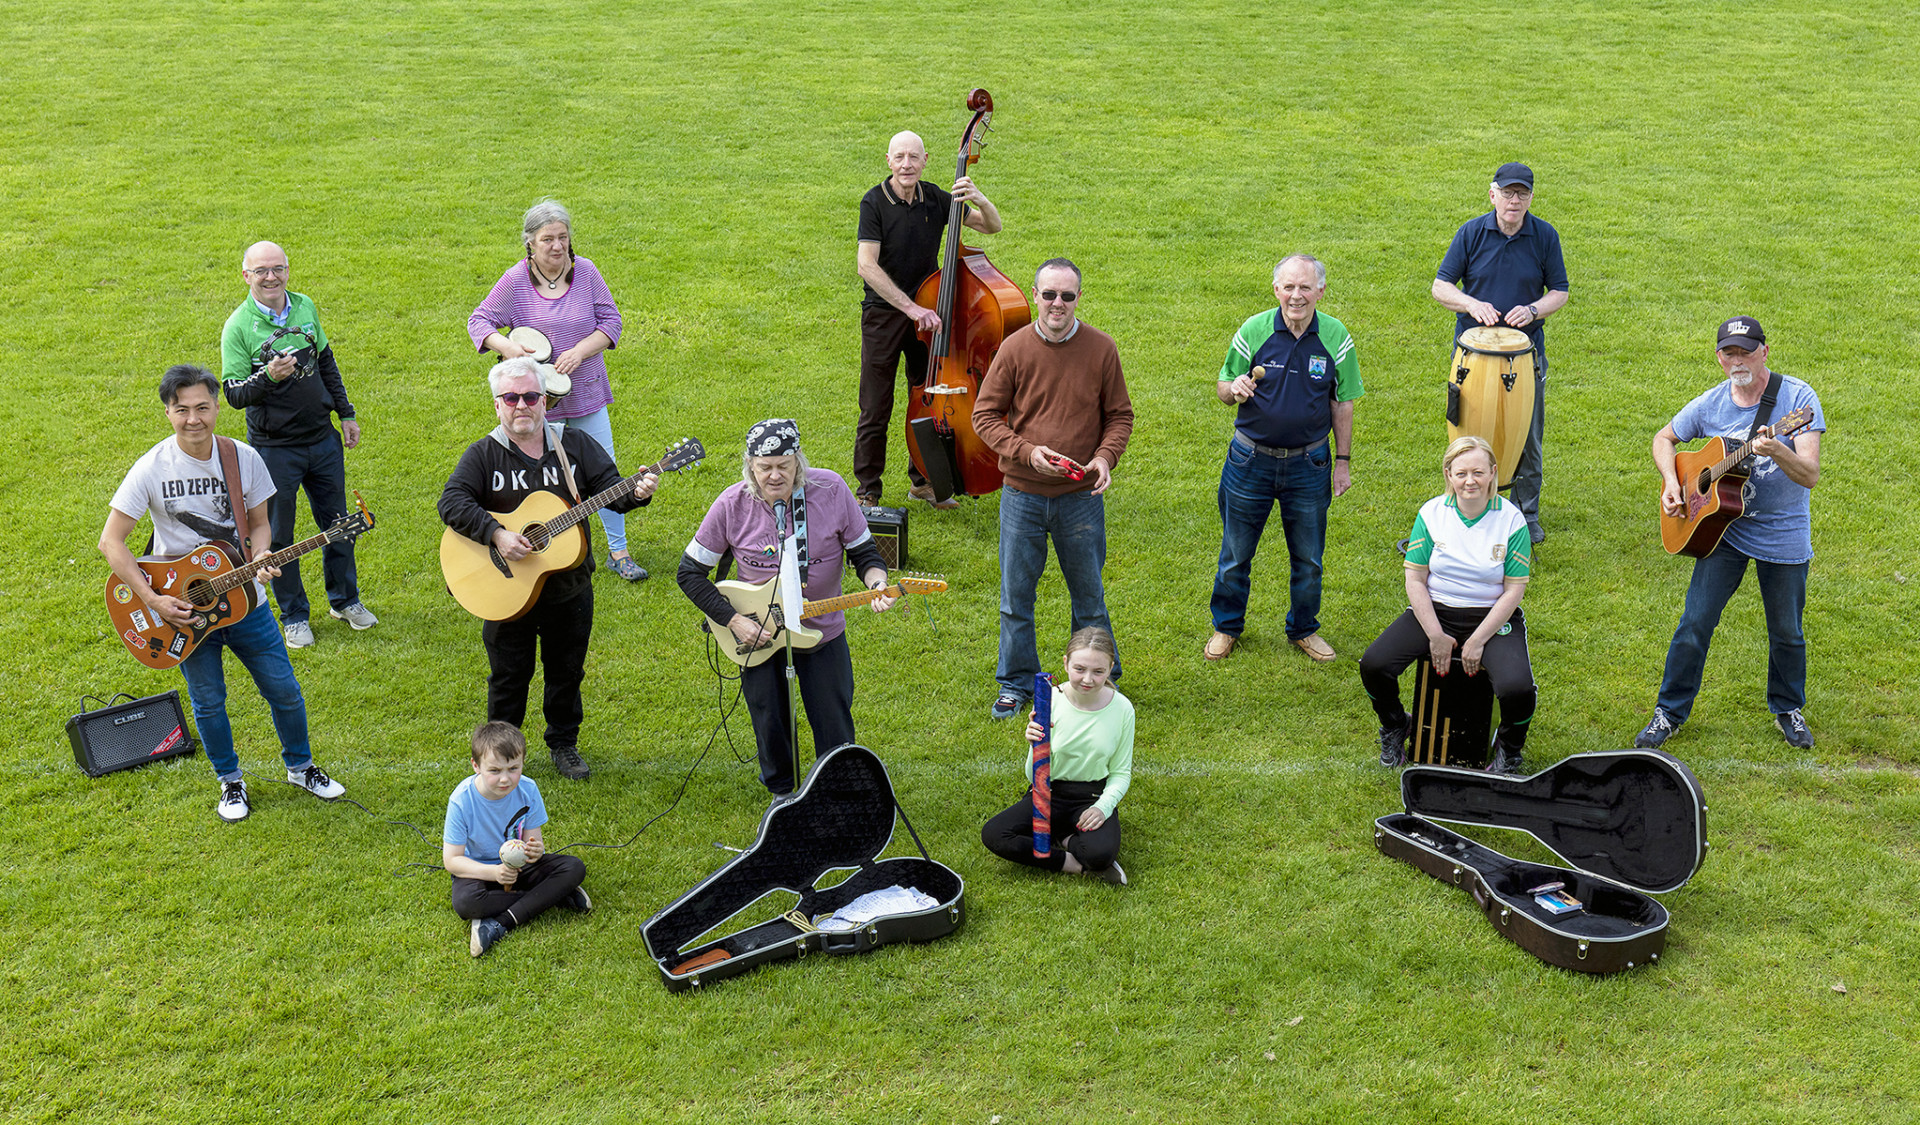 ‘Puddlefest’ music event will help raise money for playgroup